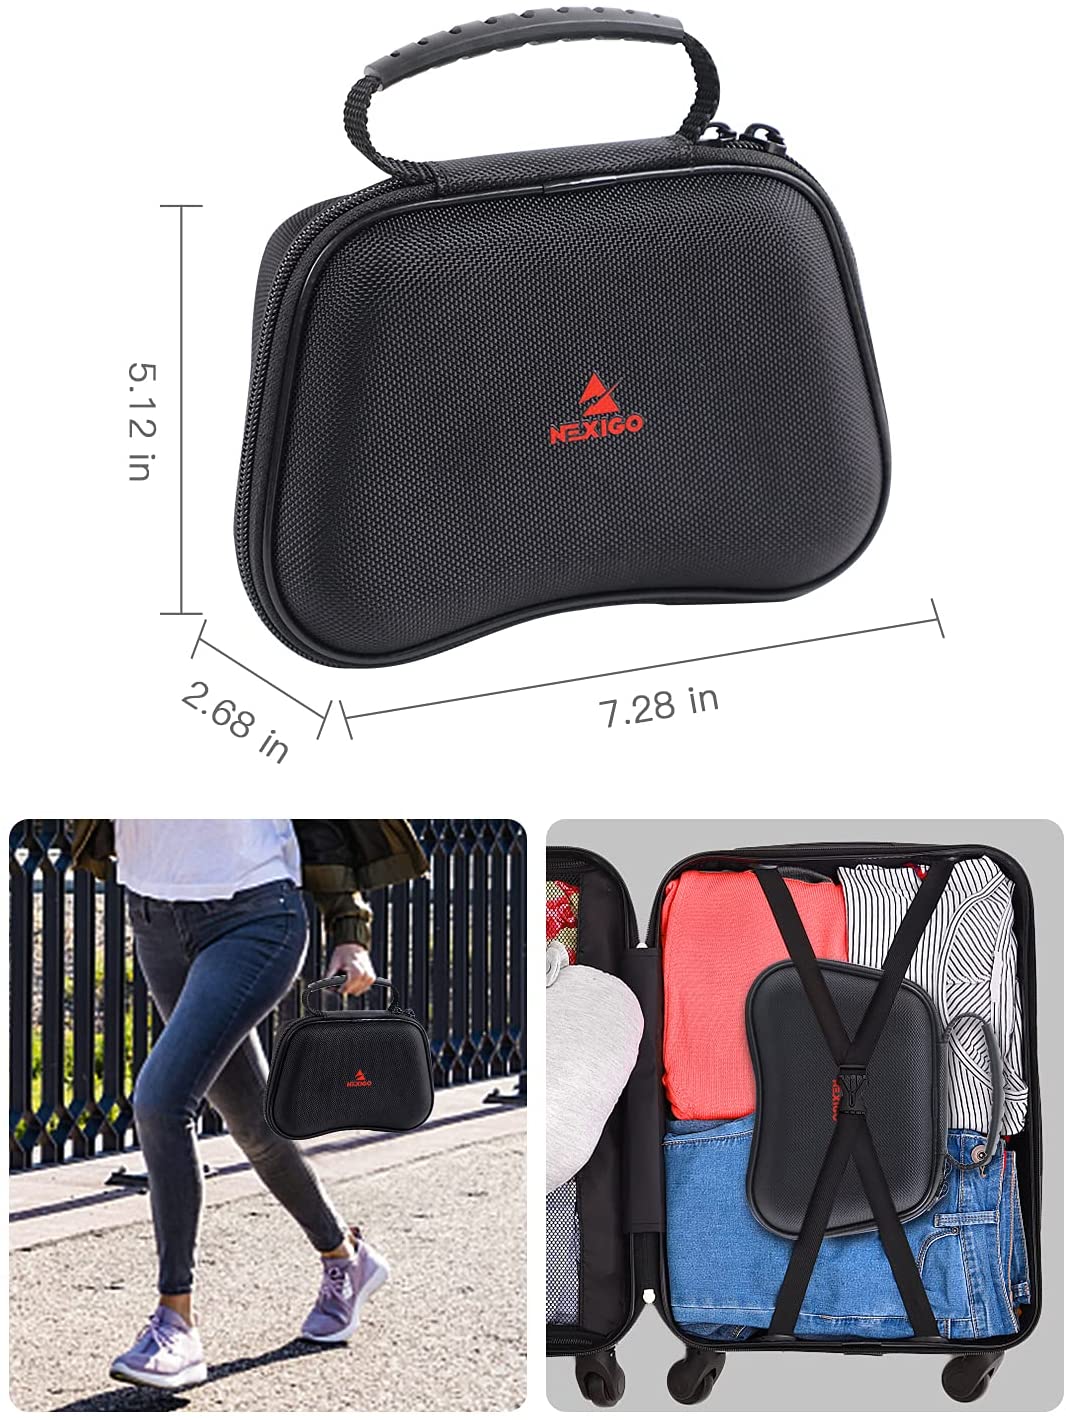 This portable case measures 7.28x2.68x5.12in, ensuring excellent portability.